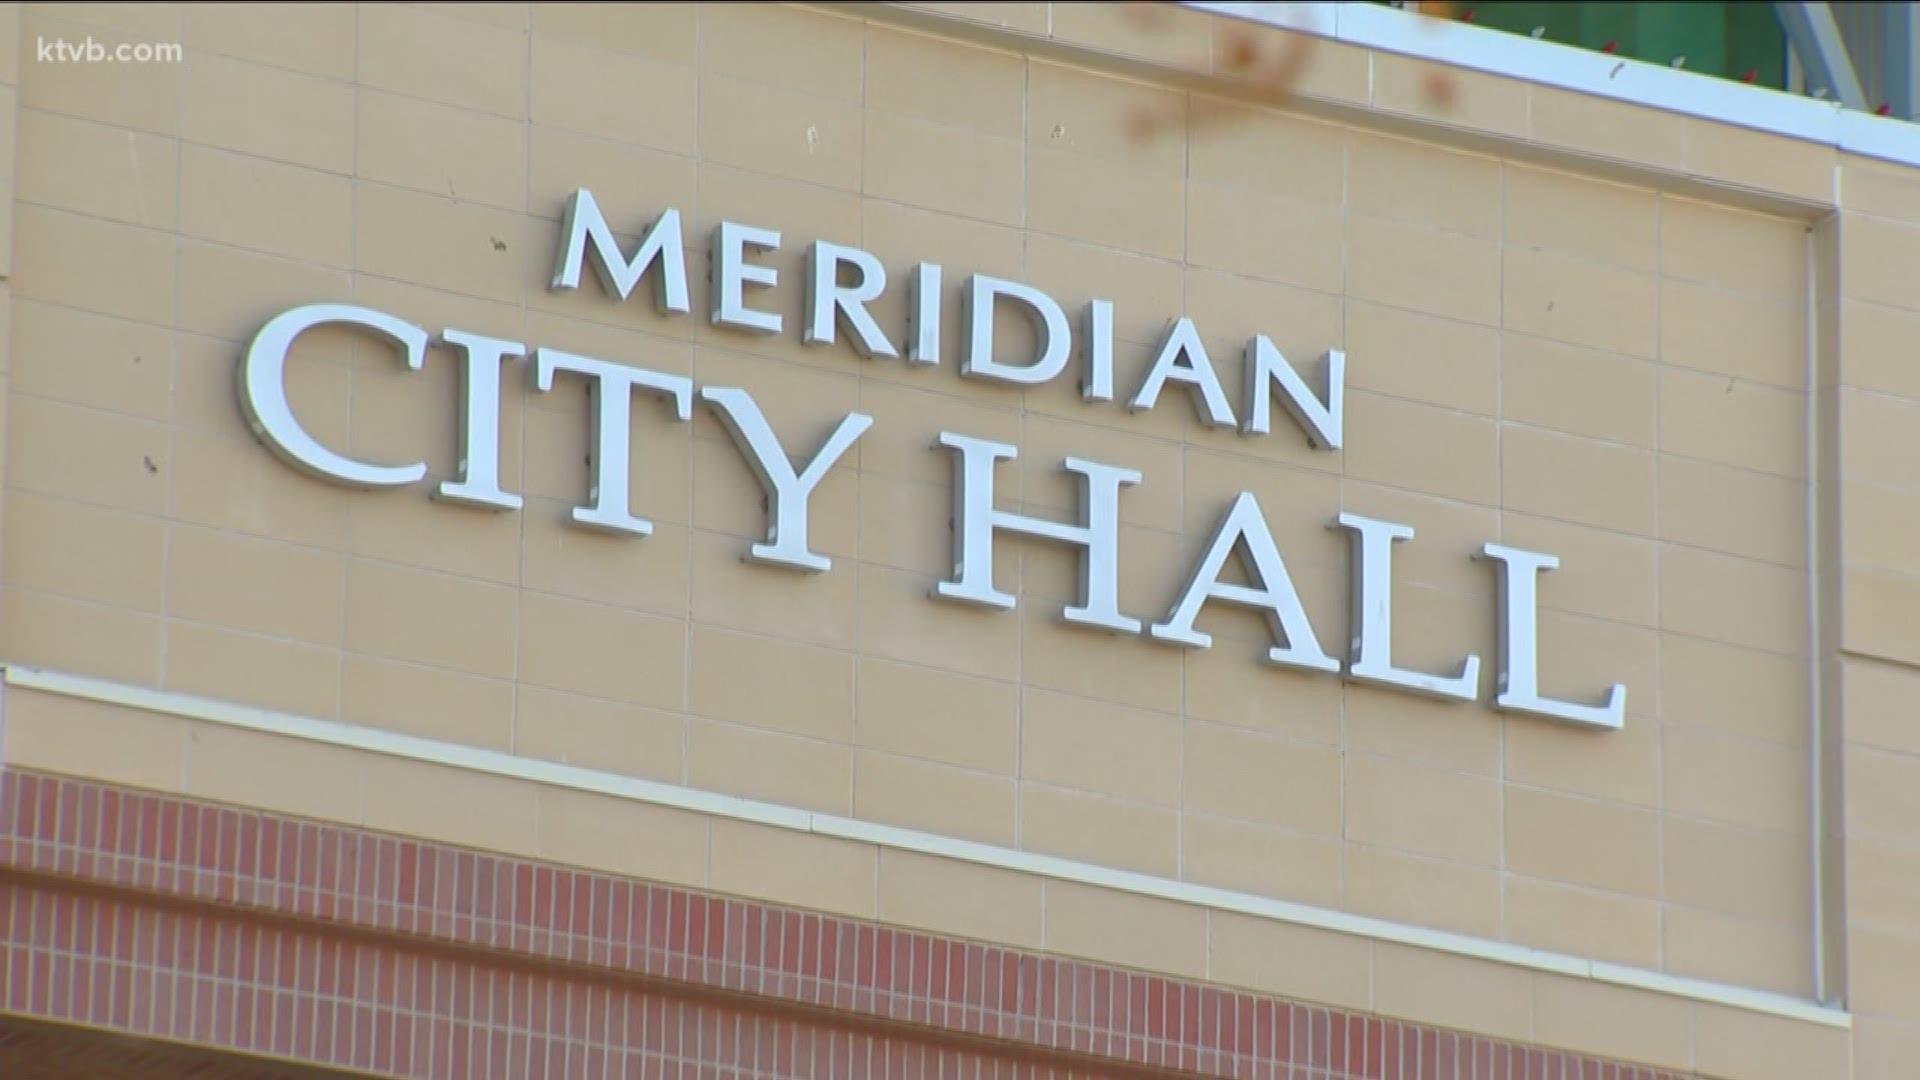 Using your phone while driving in Meridian may soon be illegal. A proposed city ordinance is up for discussion Tuesday night.